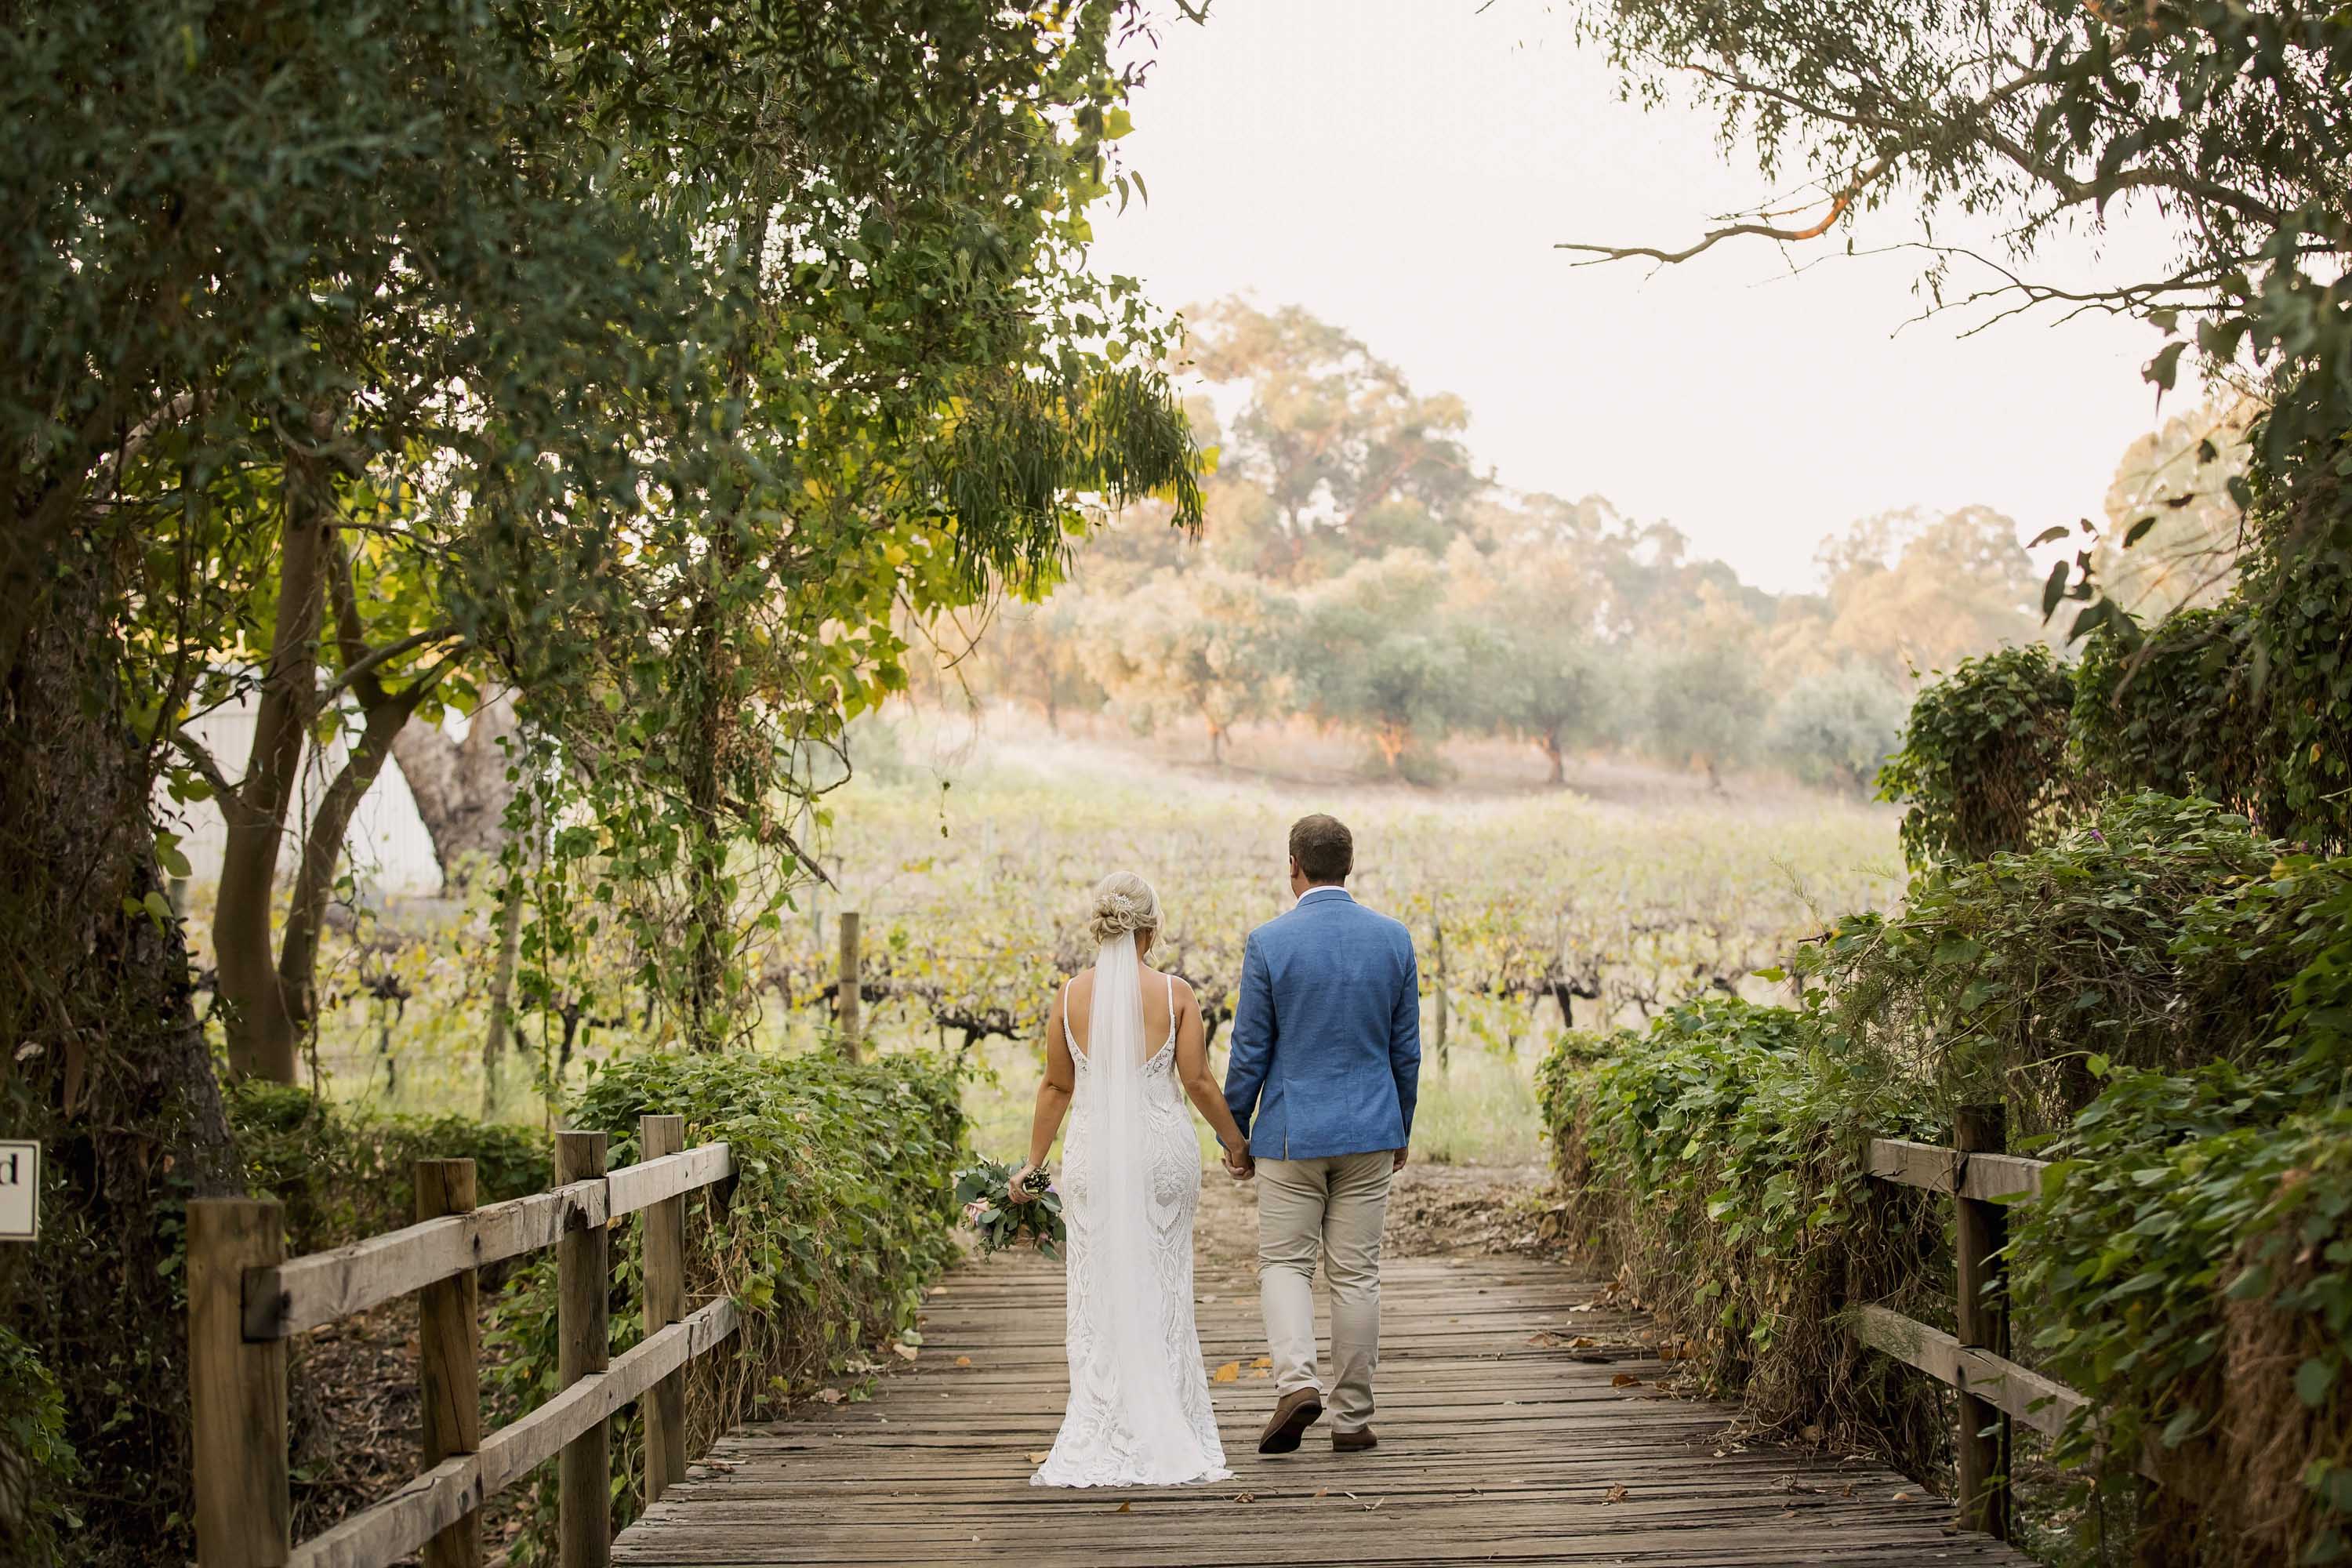 Married at Carilley Estate in Swan Valley